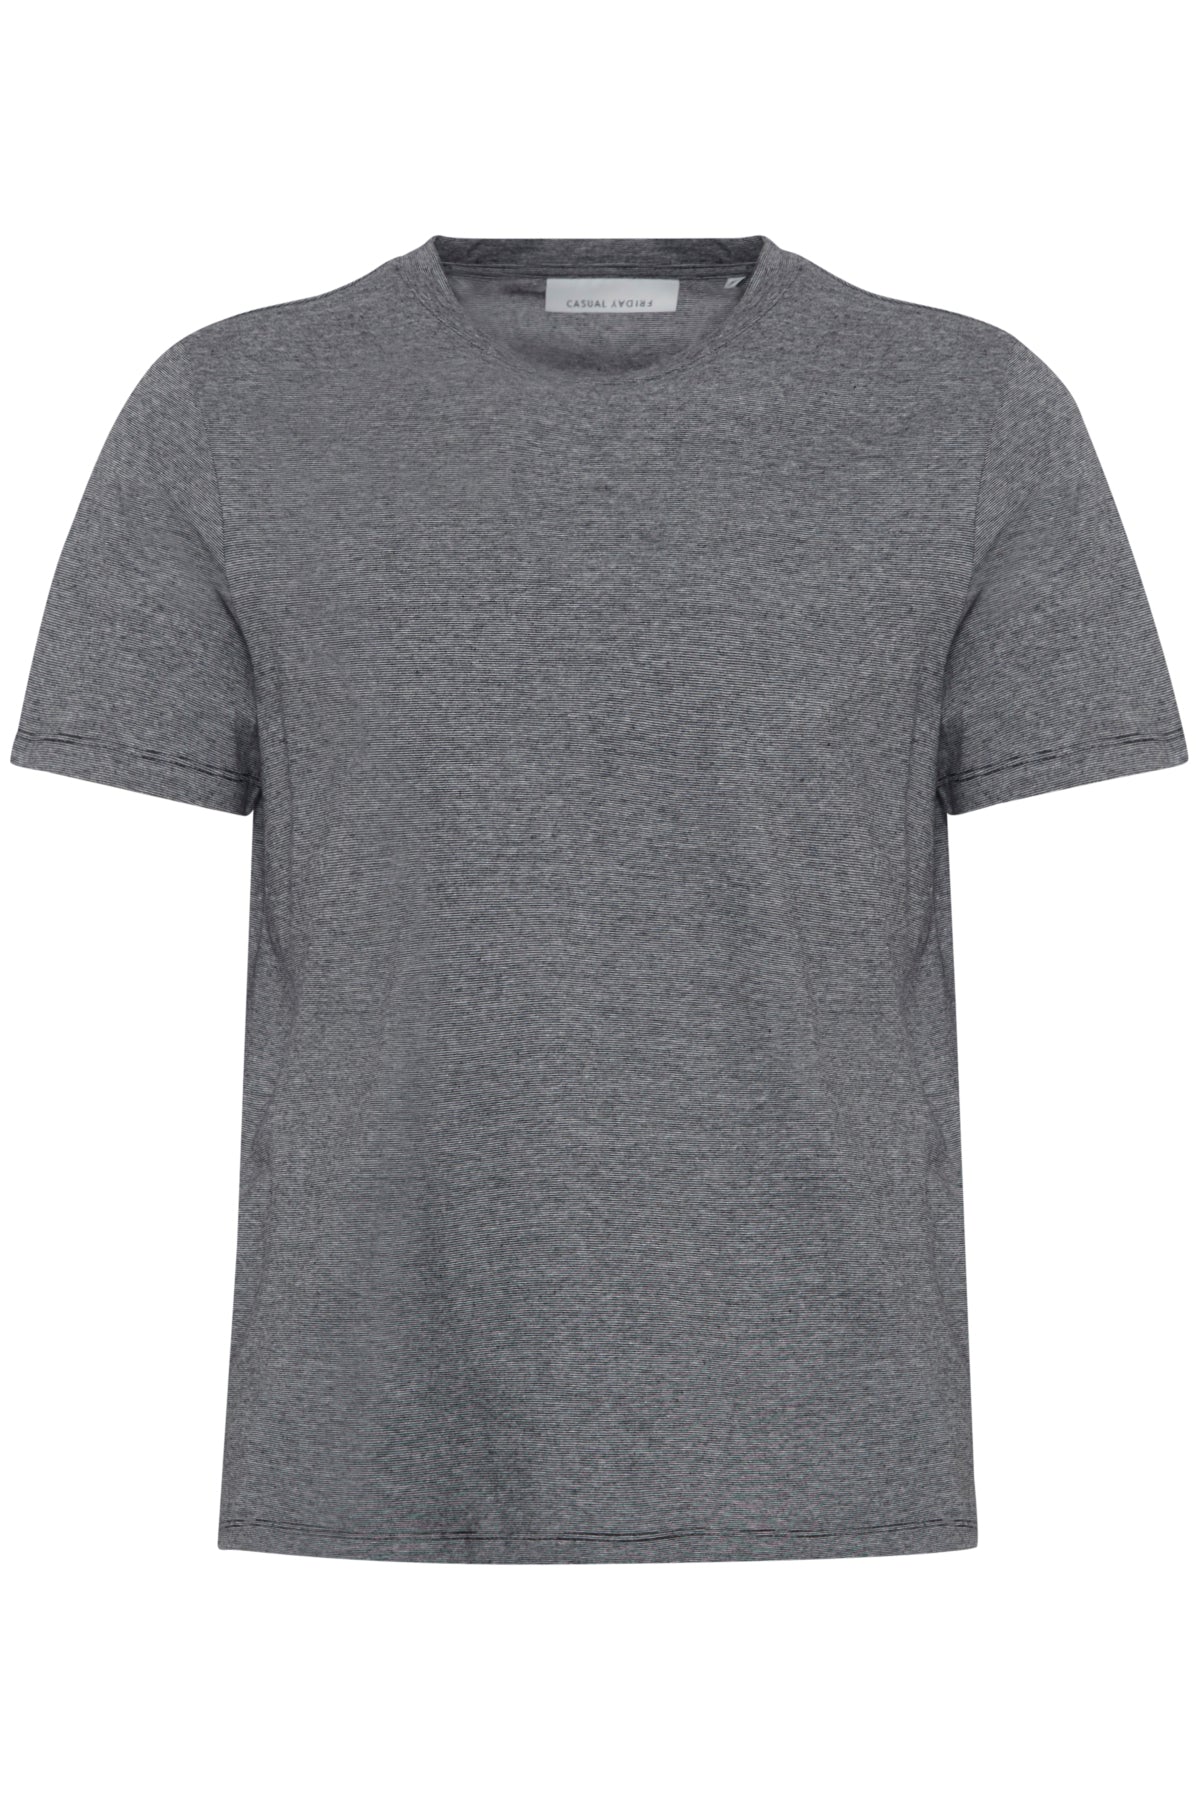 Thor Micro Striped Tee - Pewter Mix - The Sons online